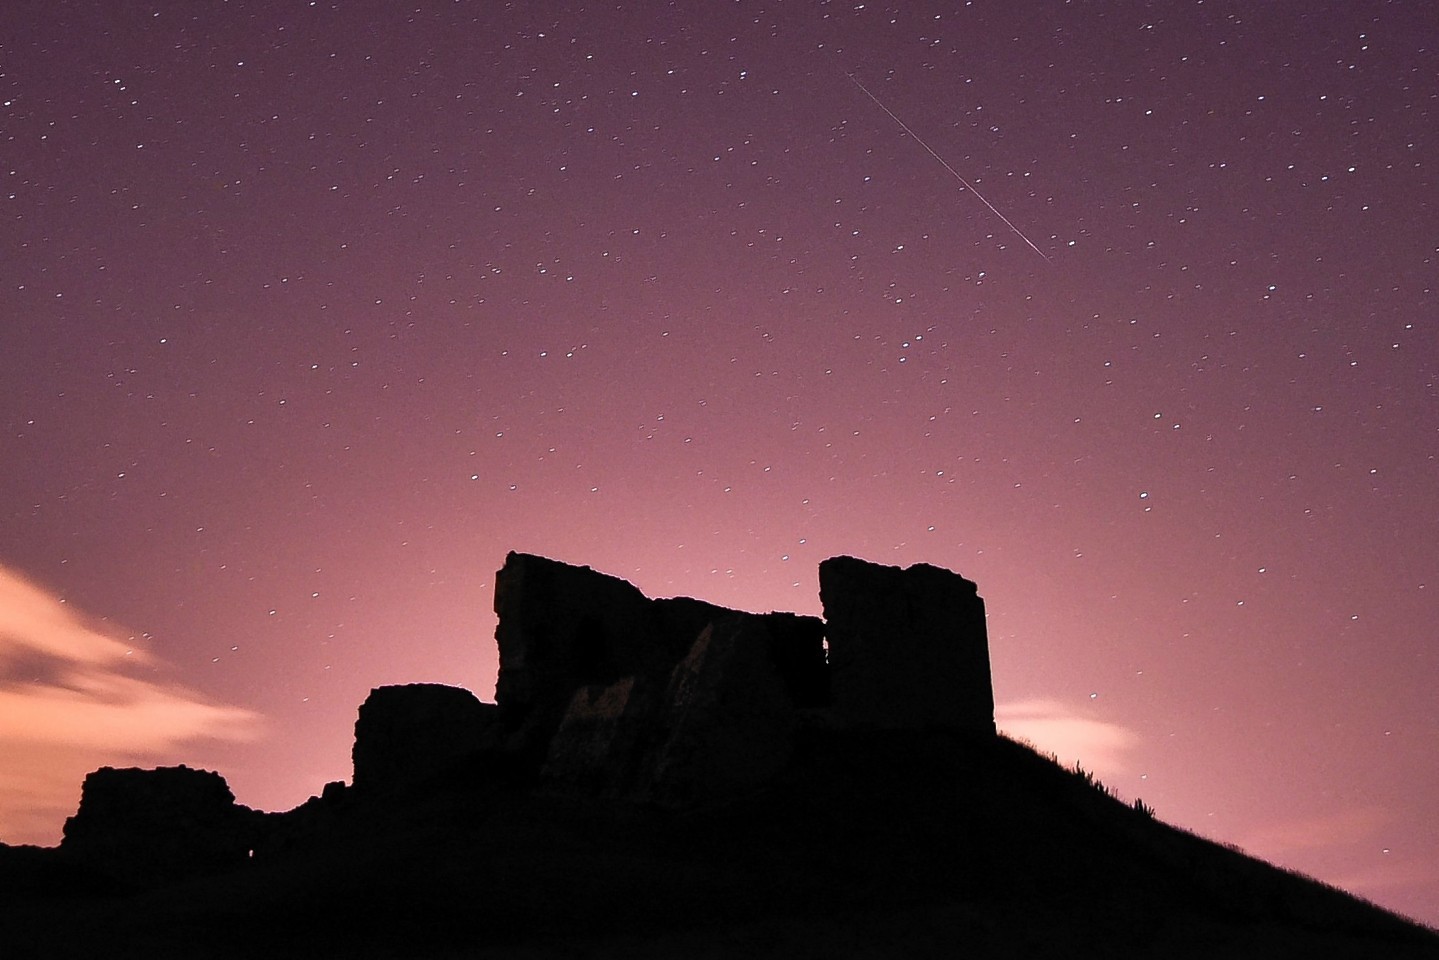 A meteor seen passing over the ruins of Duffus Castle in Moray